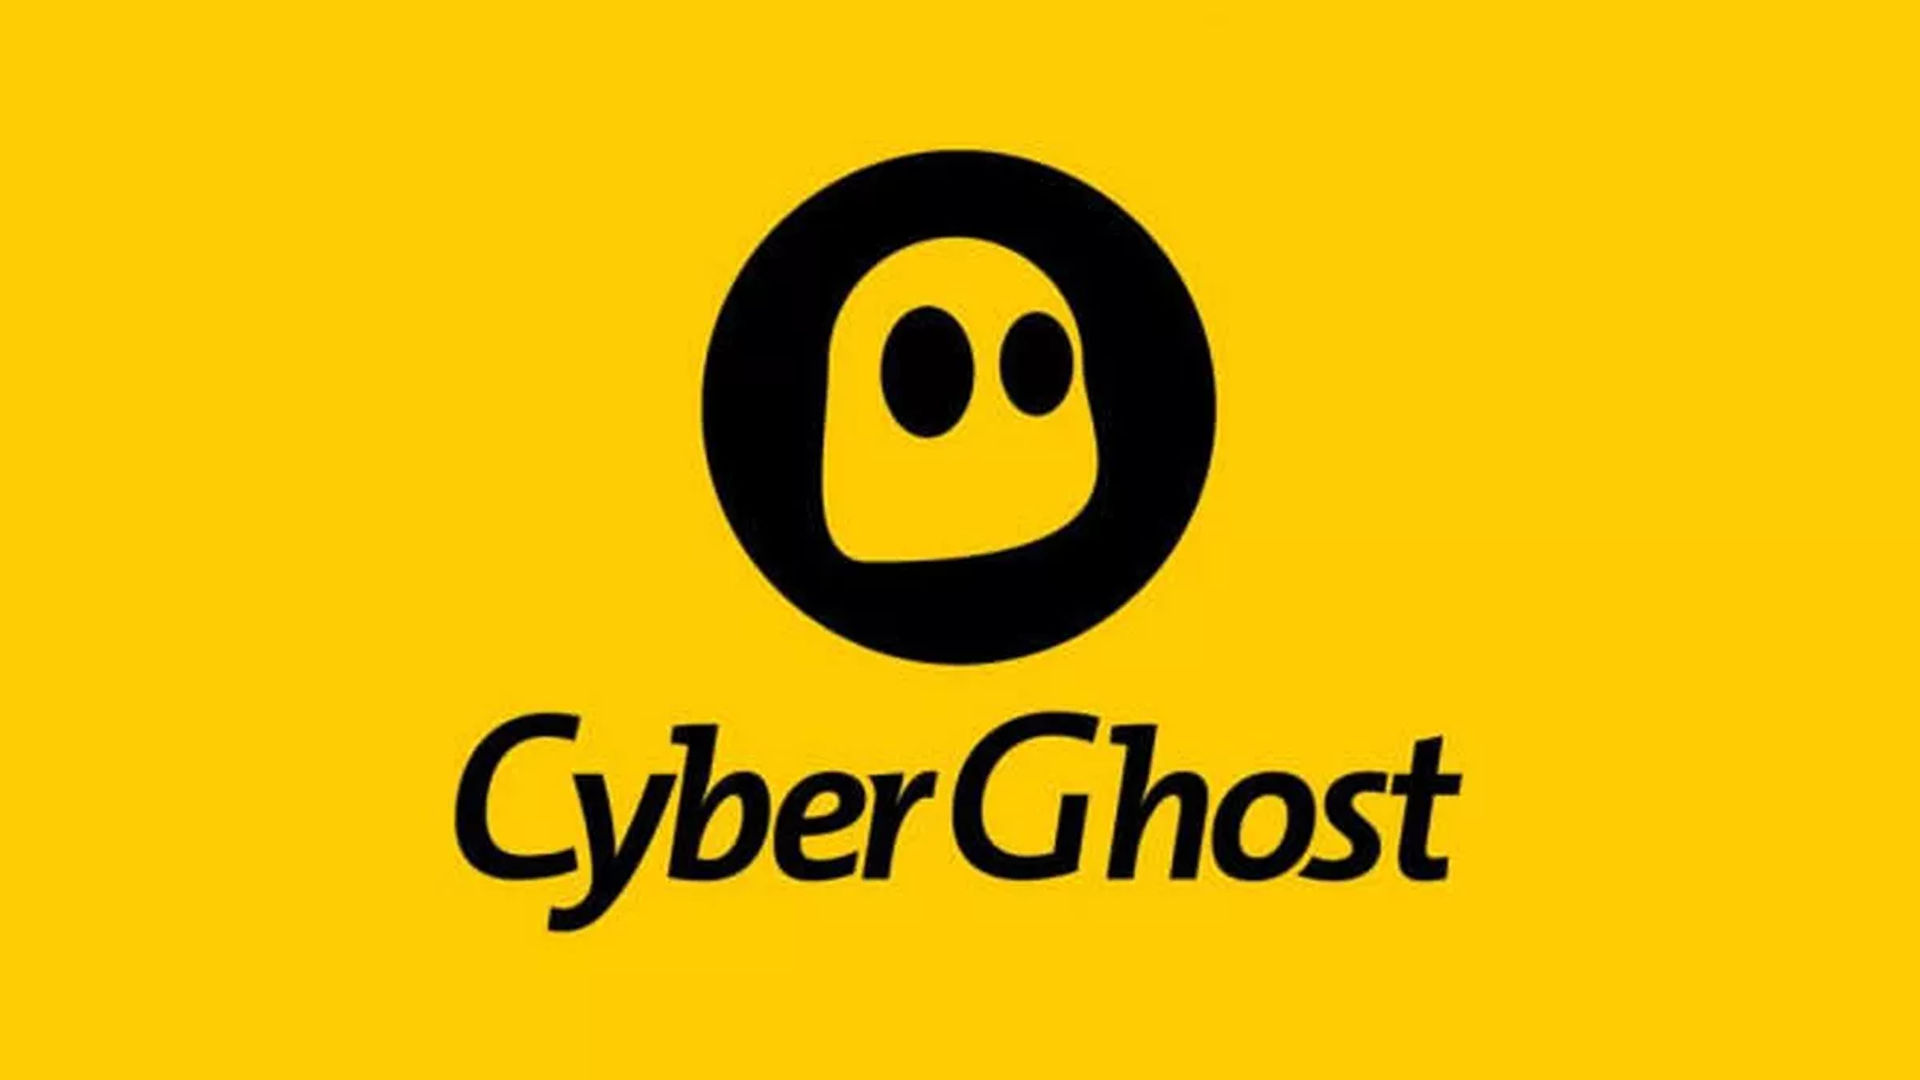 Best mobile VPNs, number 2: CyberGhost. Image shows its logo.